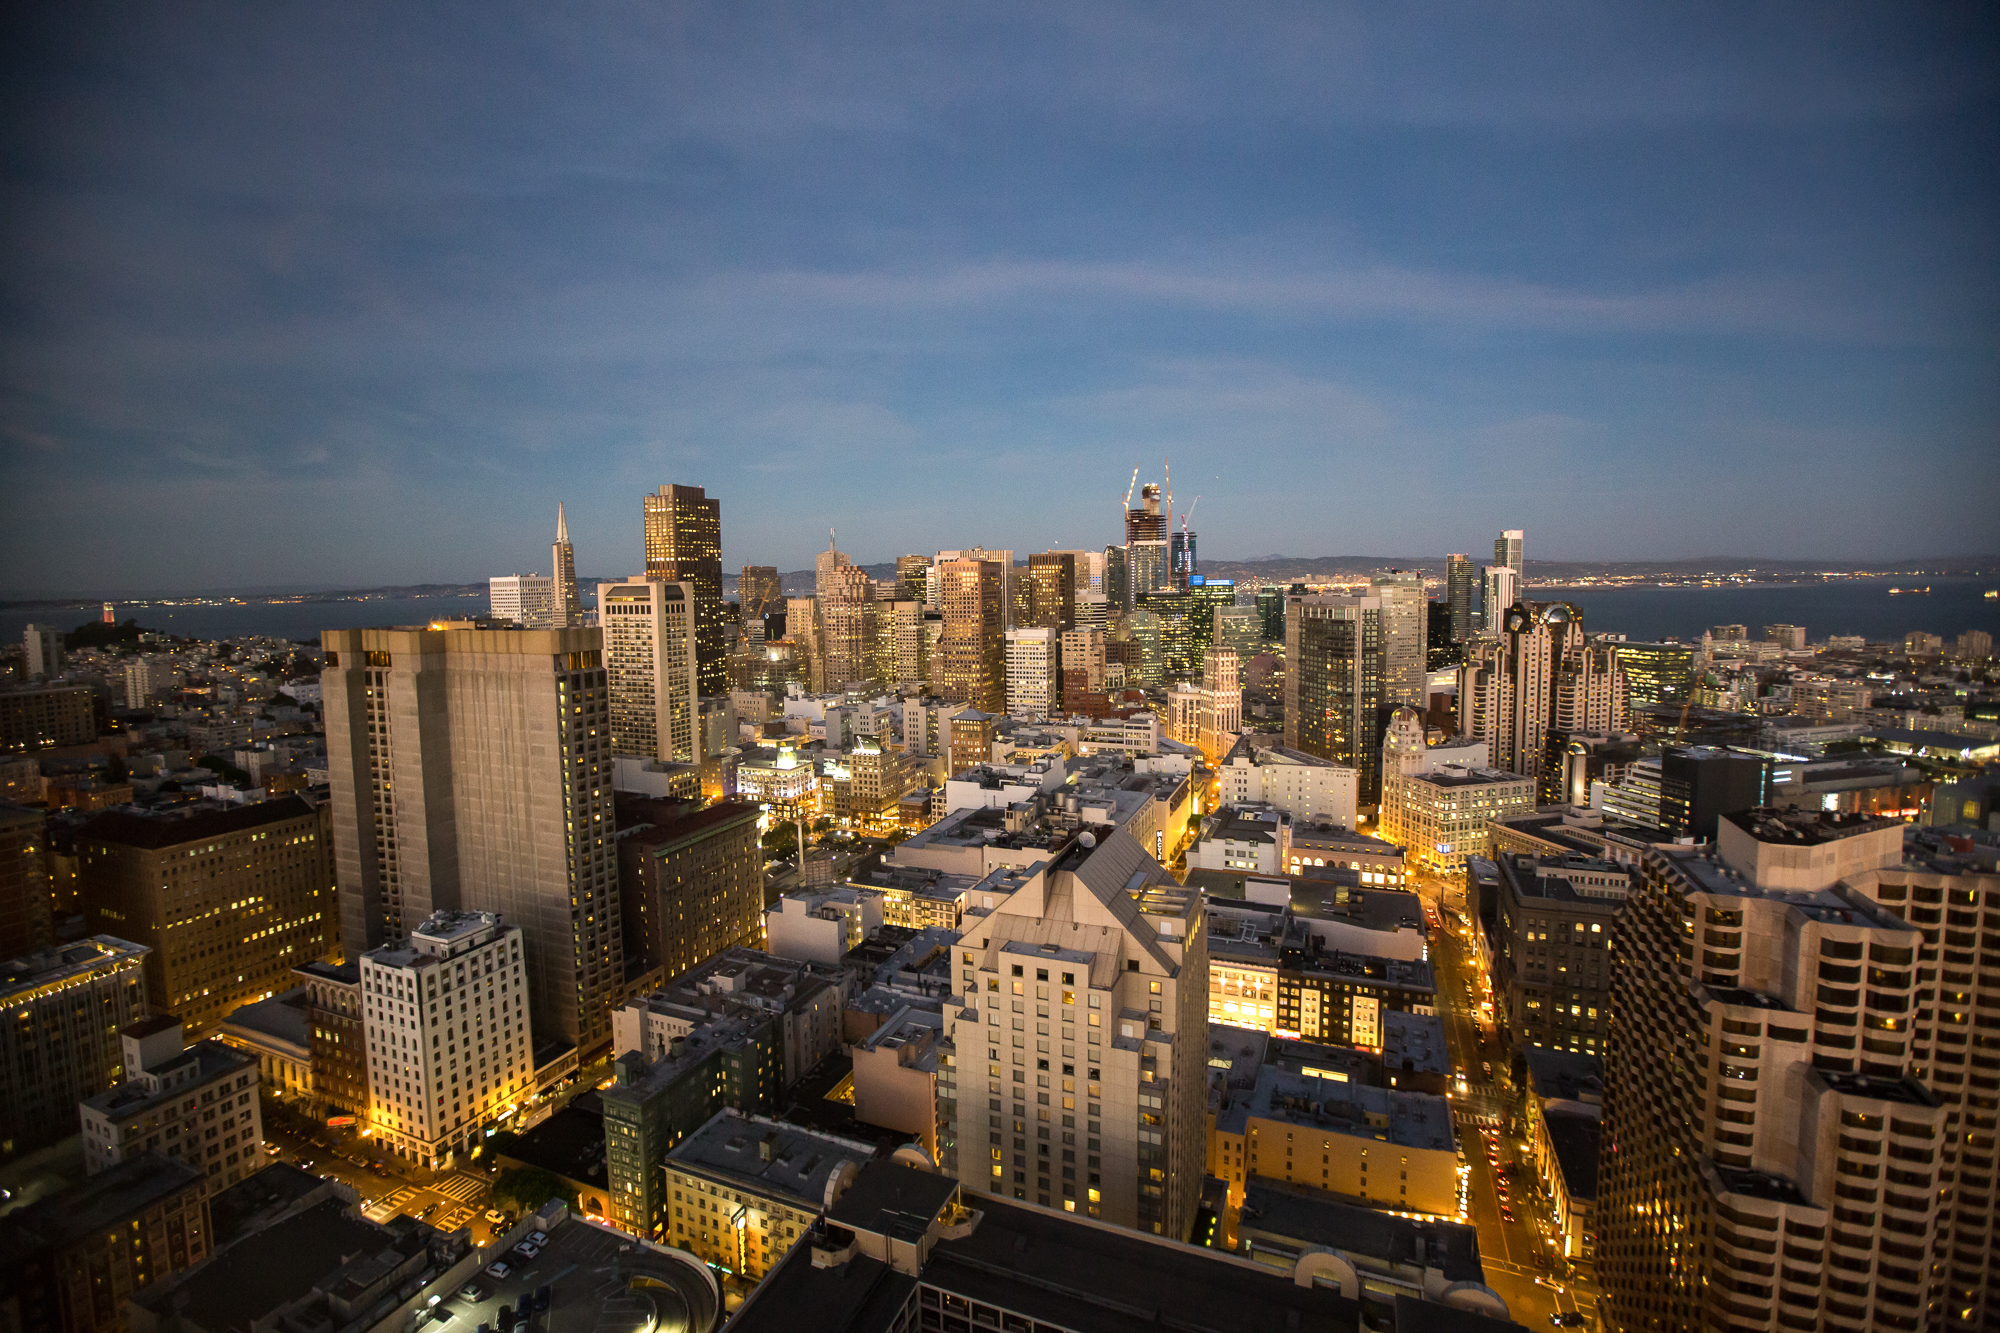 The downtown San Francisco city skyline at sunset from above. SF event photographer Drew Bird.